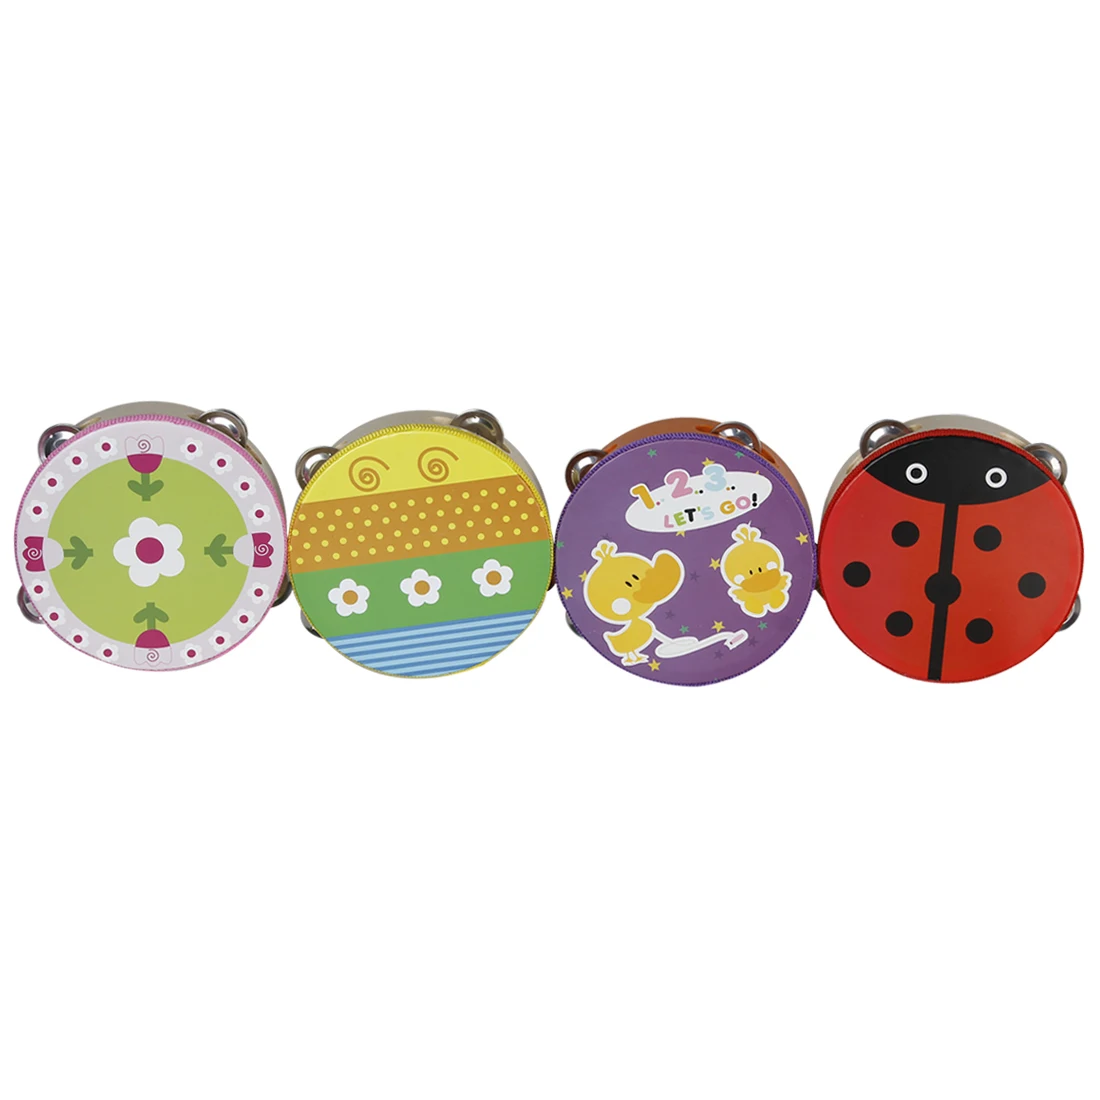 6 Inches Animal Cartoon Pattern Lovely HandDrum Tambourine Mini Musical Percussion Baby Music Enlightenment Kid Birthday Gifts